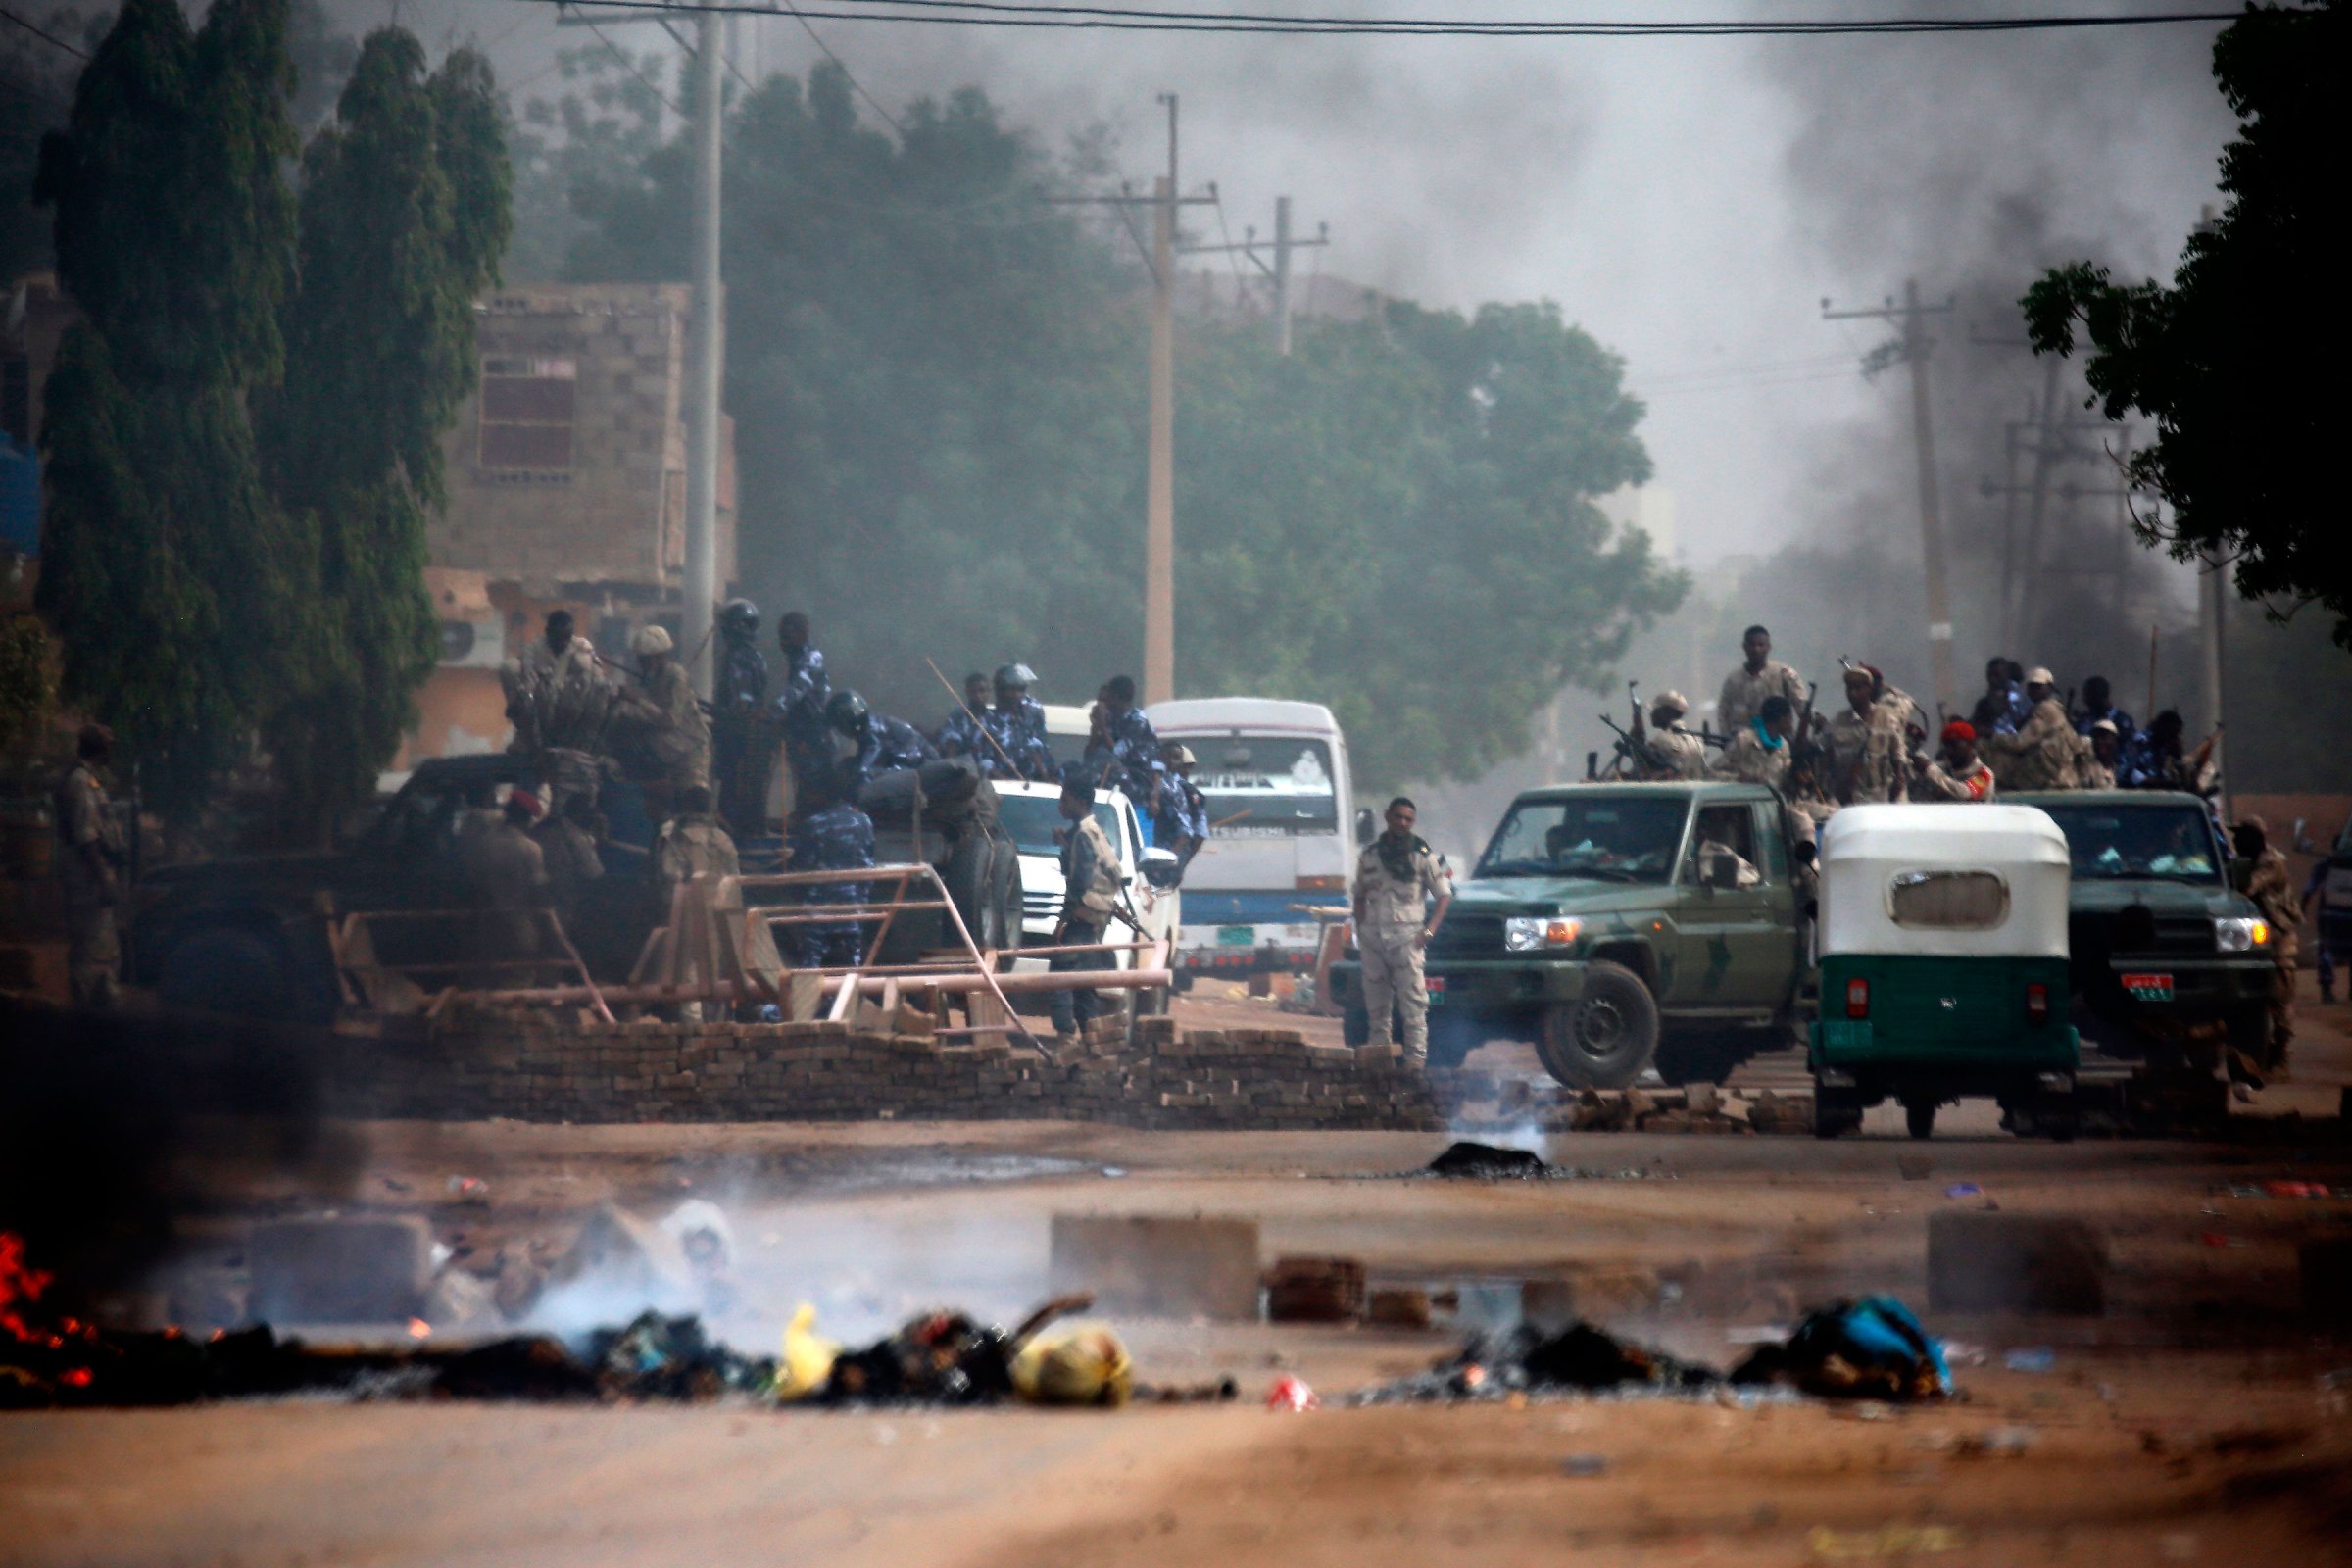 Sudanese forces are deployed around Khartoum's army headquarters on June 3, 2019 as they try to disperse Khartoum's sit-in.